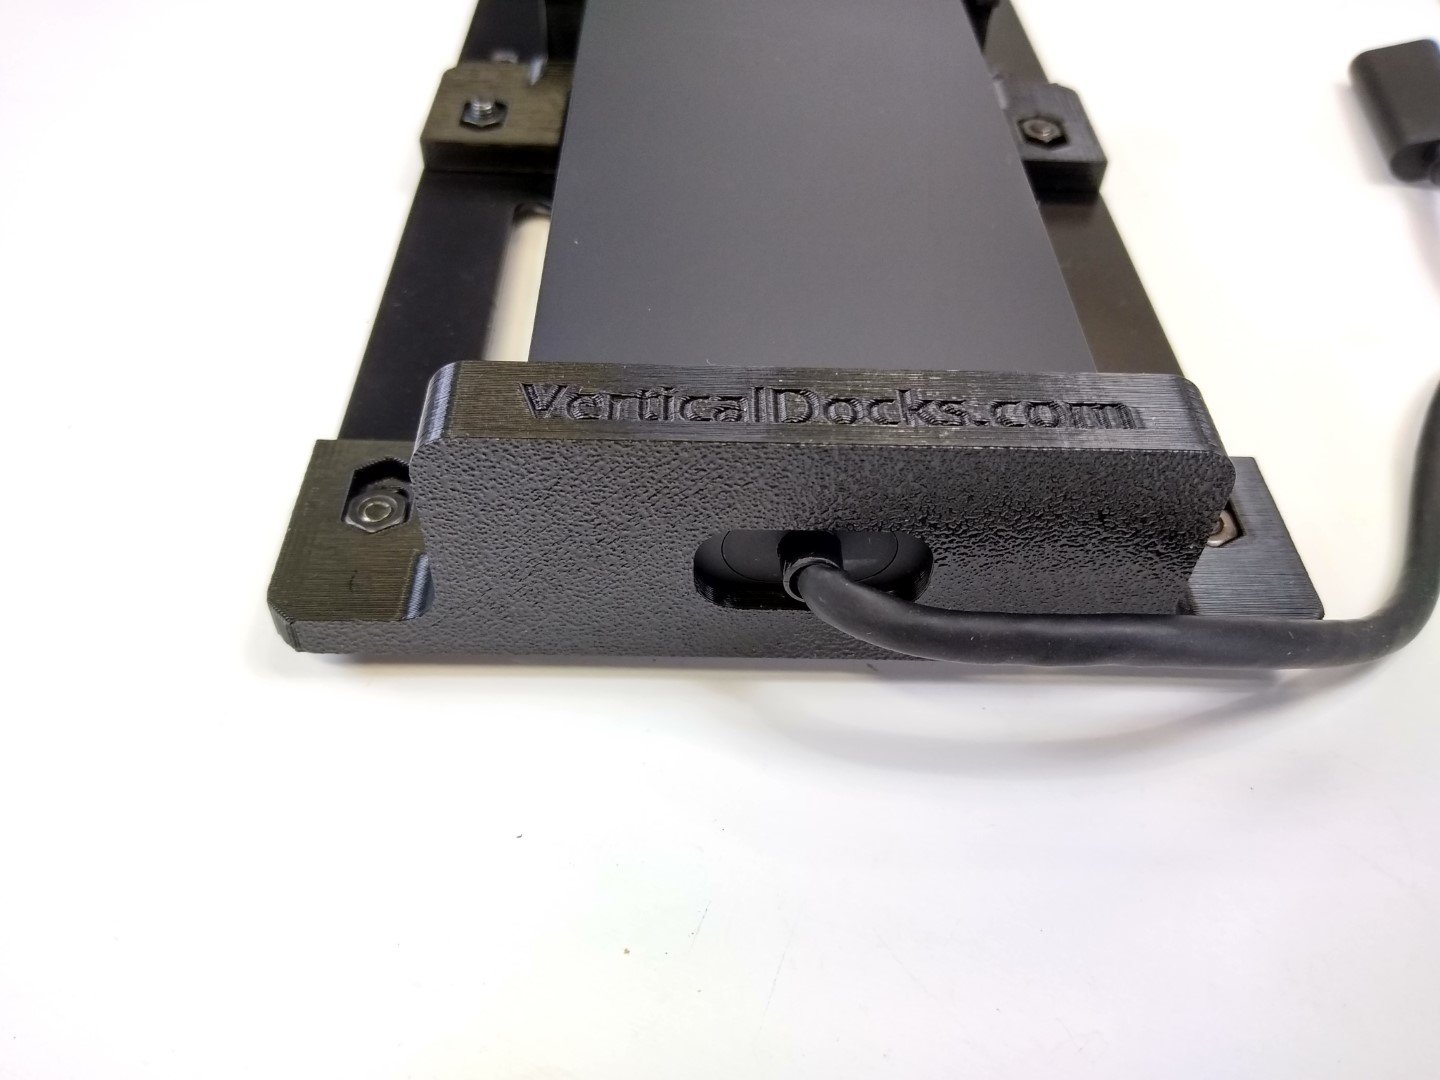 Mounting brackets for MS Surface Dock or power supply